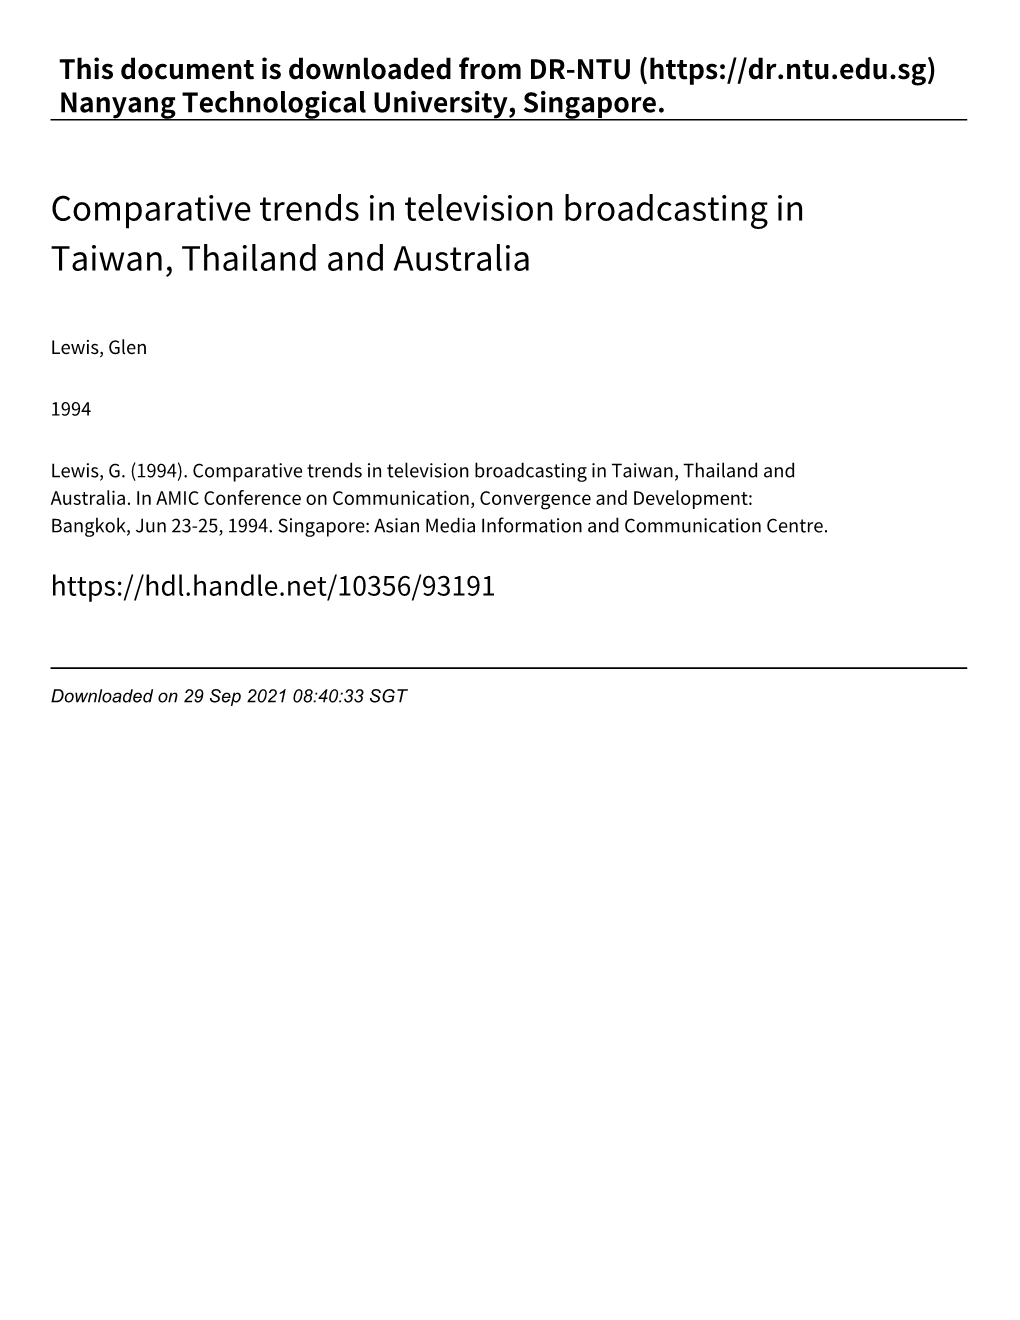 Comparative Trends in Television Broadcasting in Taiwan, Thailand and Australia